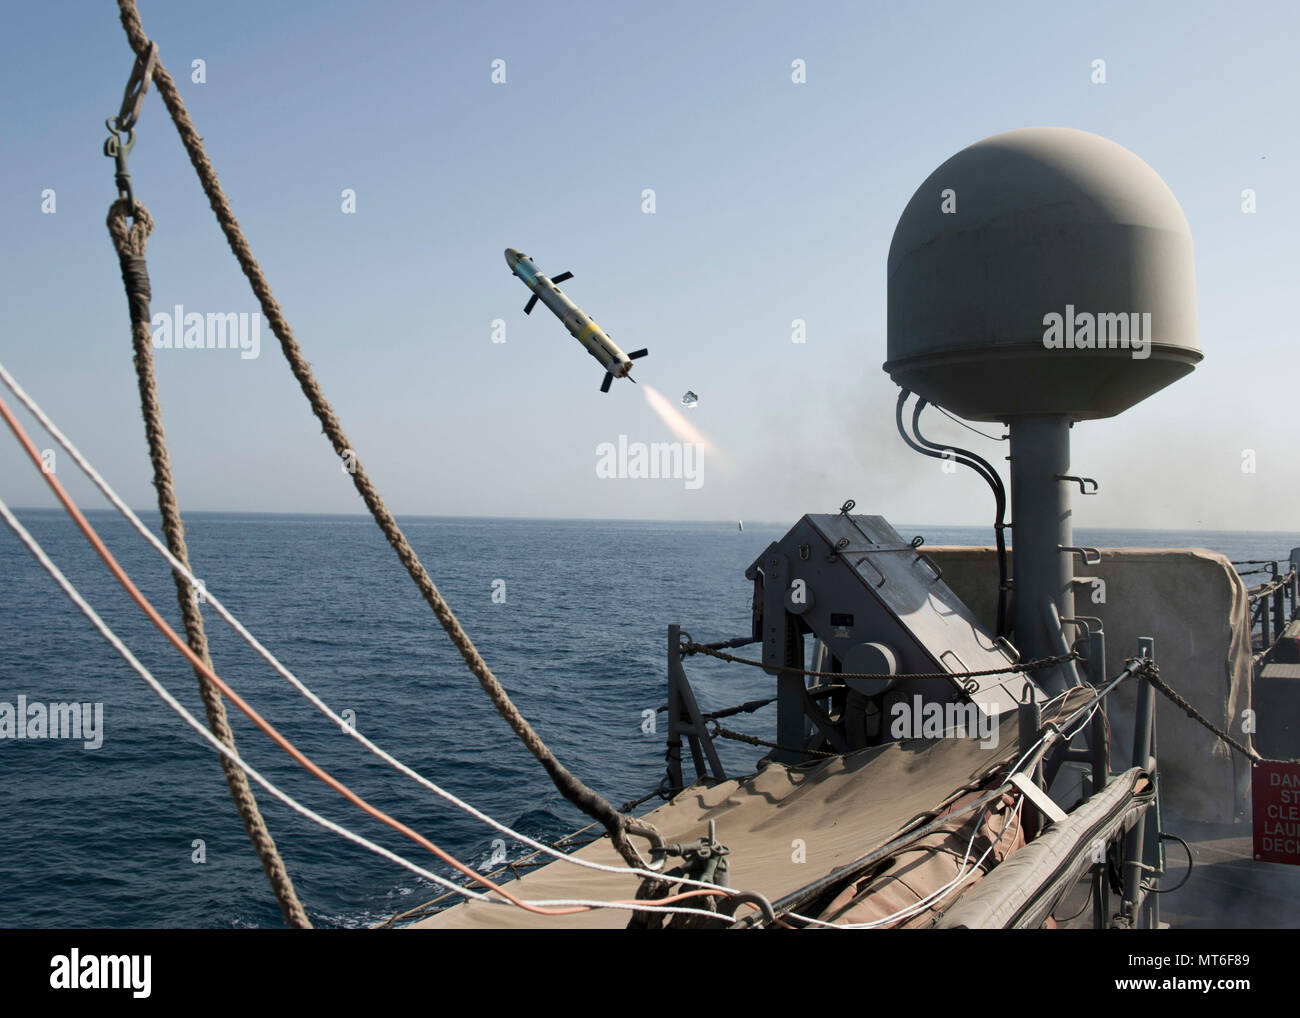 ARABIAN GULF (July 20, 2017) A griffin missile is launched from coastal patrol ship USS Thunderbolt (PC 12) during a test and proficiency fire exercise, July 18. USS Chinook is one of ten coastal patrol ships assigned to Coastal Patrol Squadron (PCRON) 1 home-ported in Manama, Bahrain in support of maritime security operations and theatre security cooperation efforts in the U.S. 5th Fleet area of operations. (U.S. Navy photo by Mass Communication Specialist 2nd Class Austin L. Simmons) Stock Photo